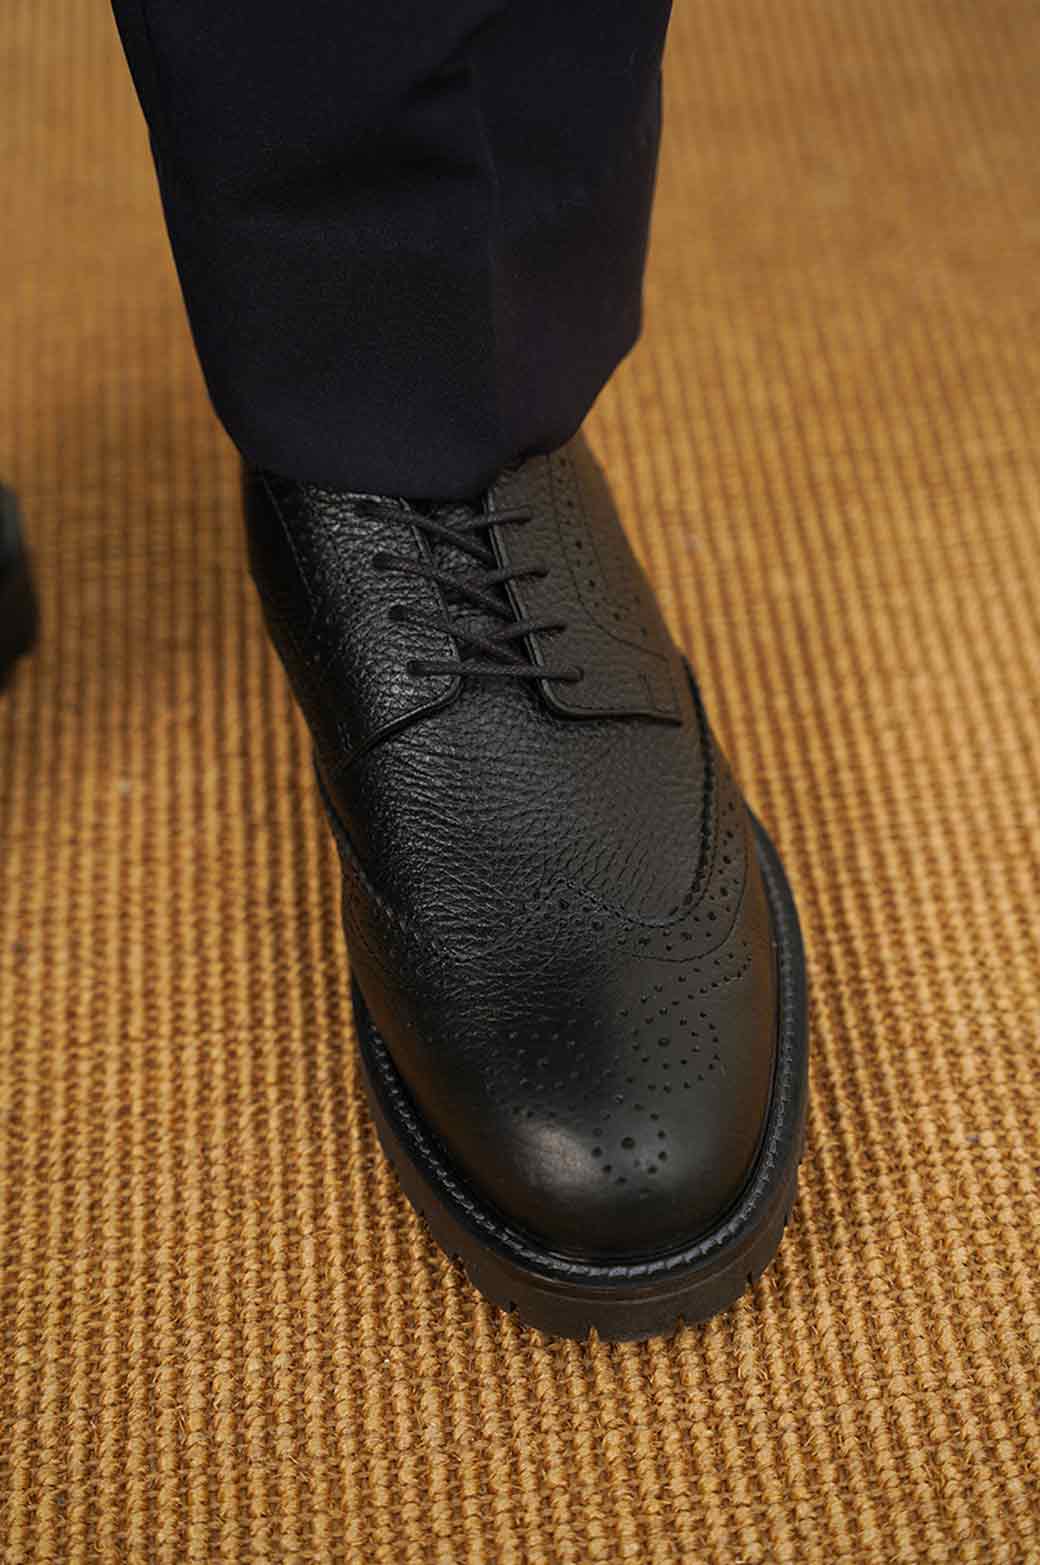 BLACK LOW-TOP LEATHER BROGUES